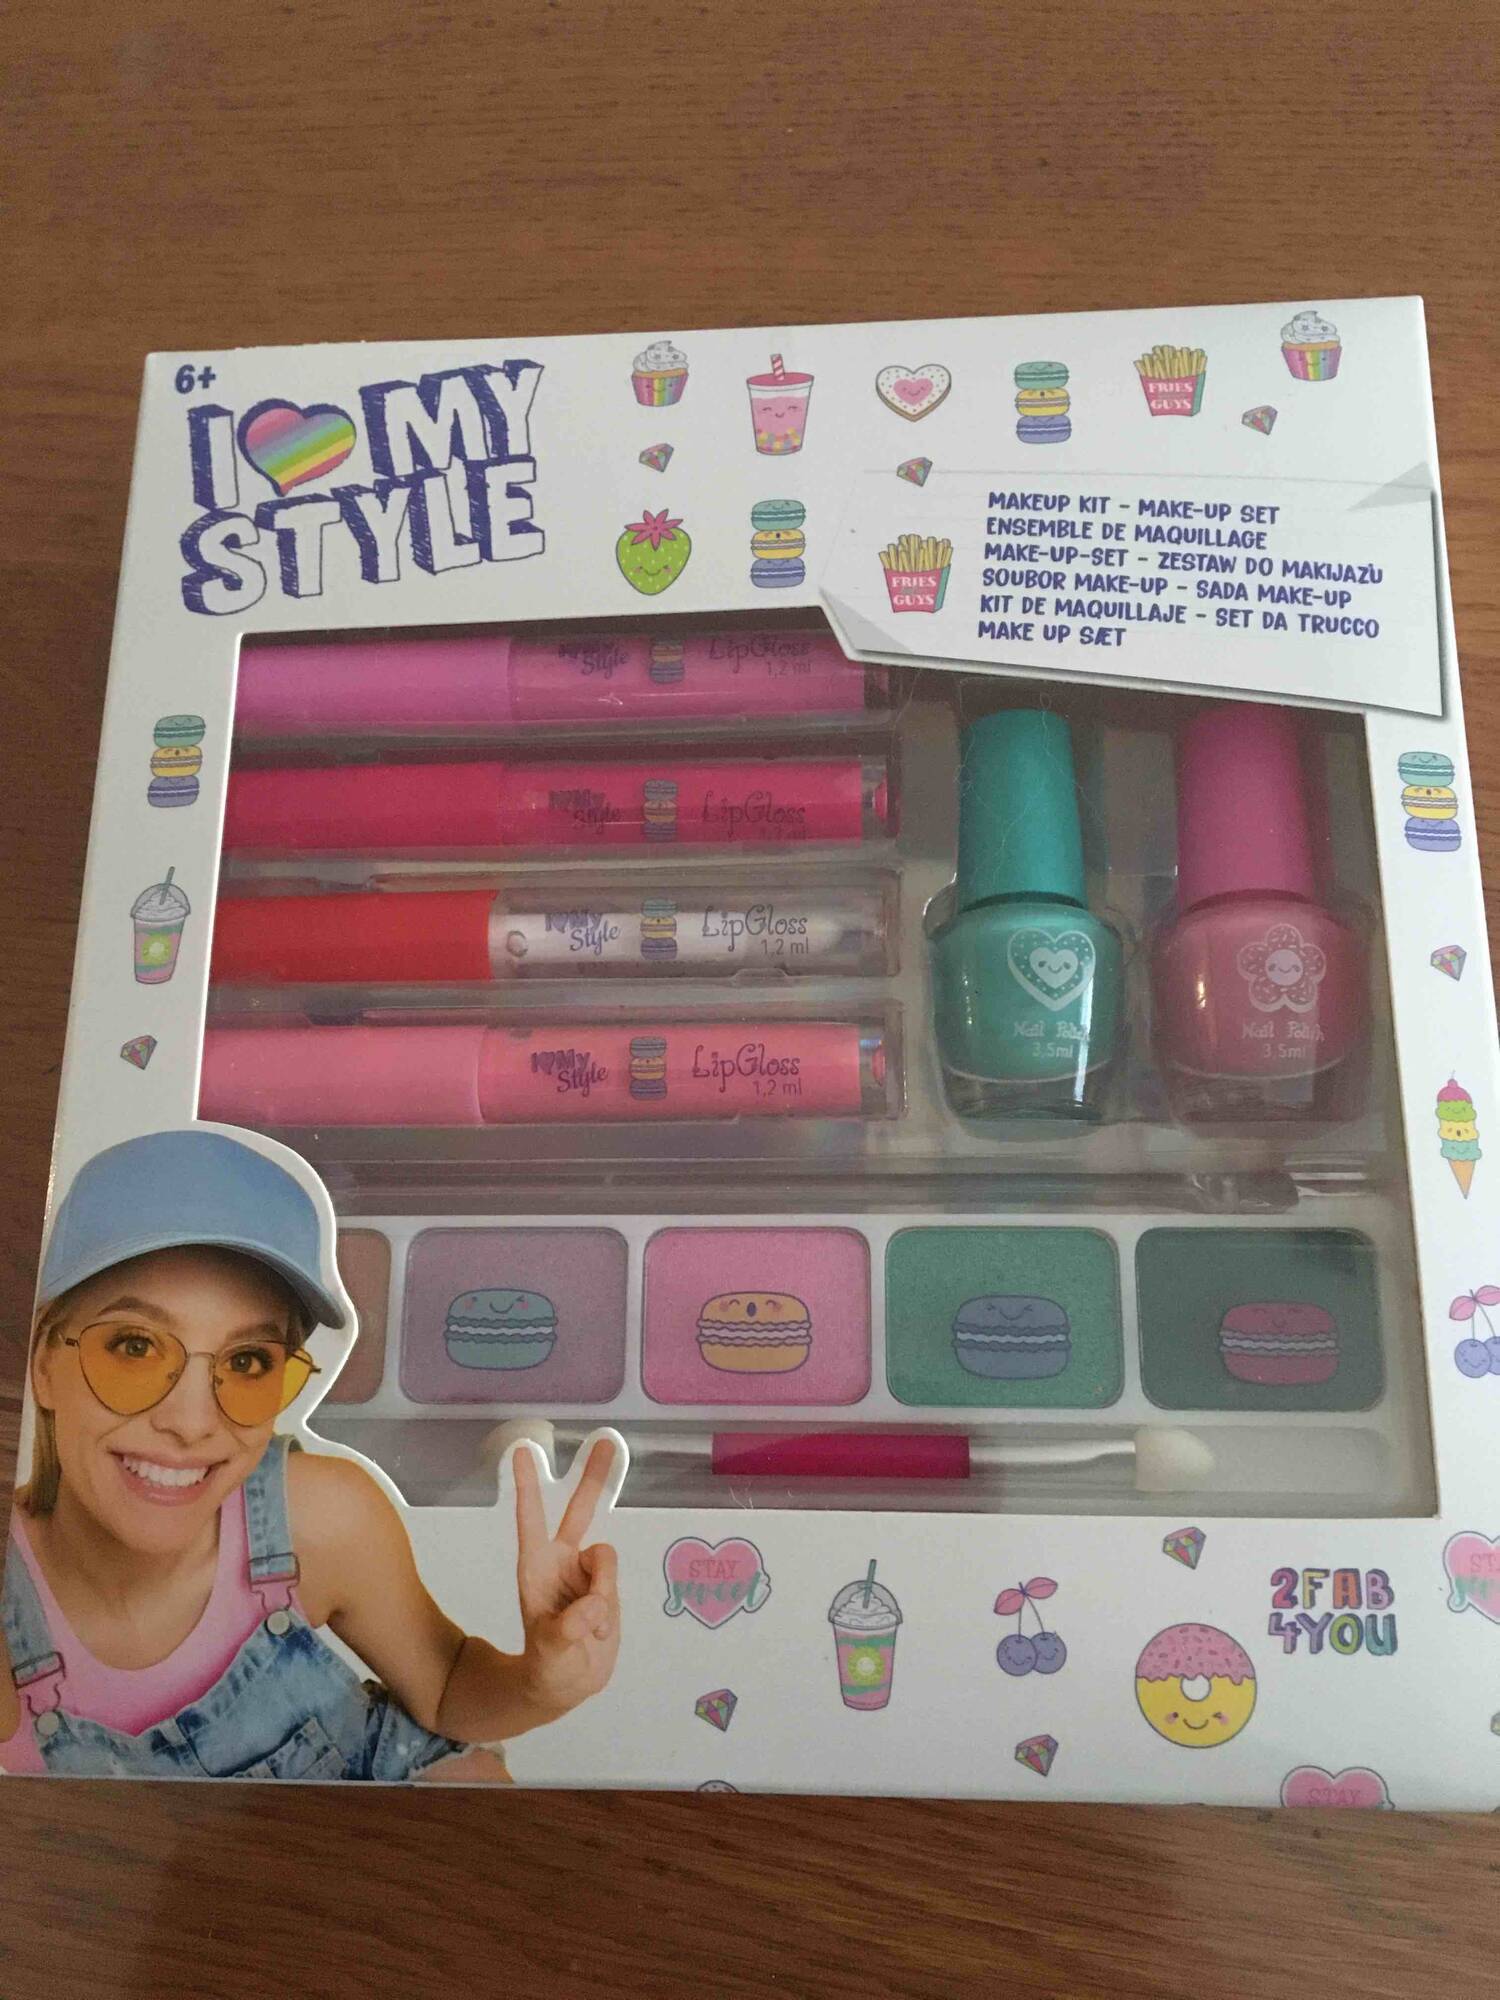 I LOVE MY STYLE - Kit de maquillage